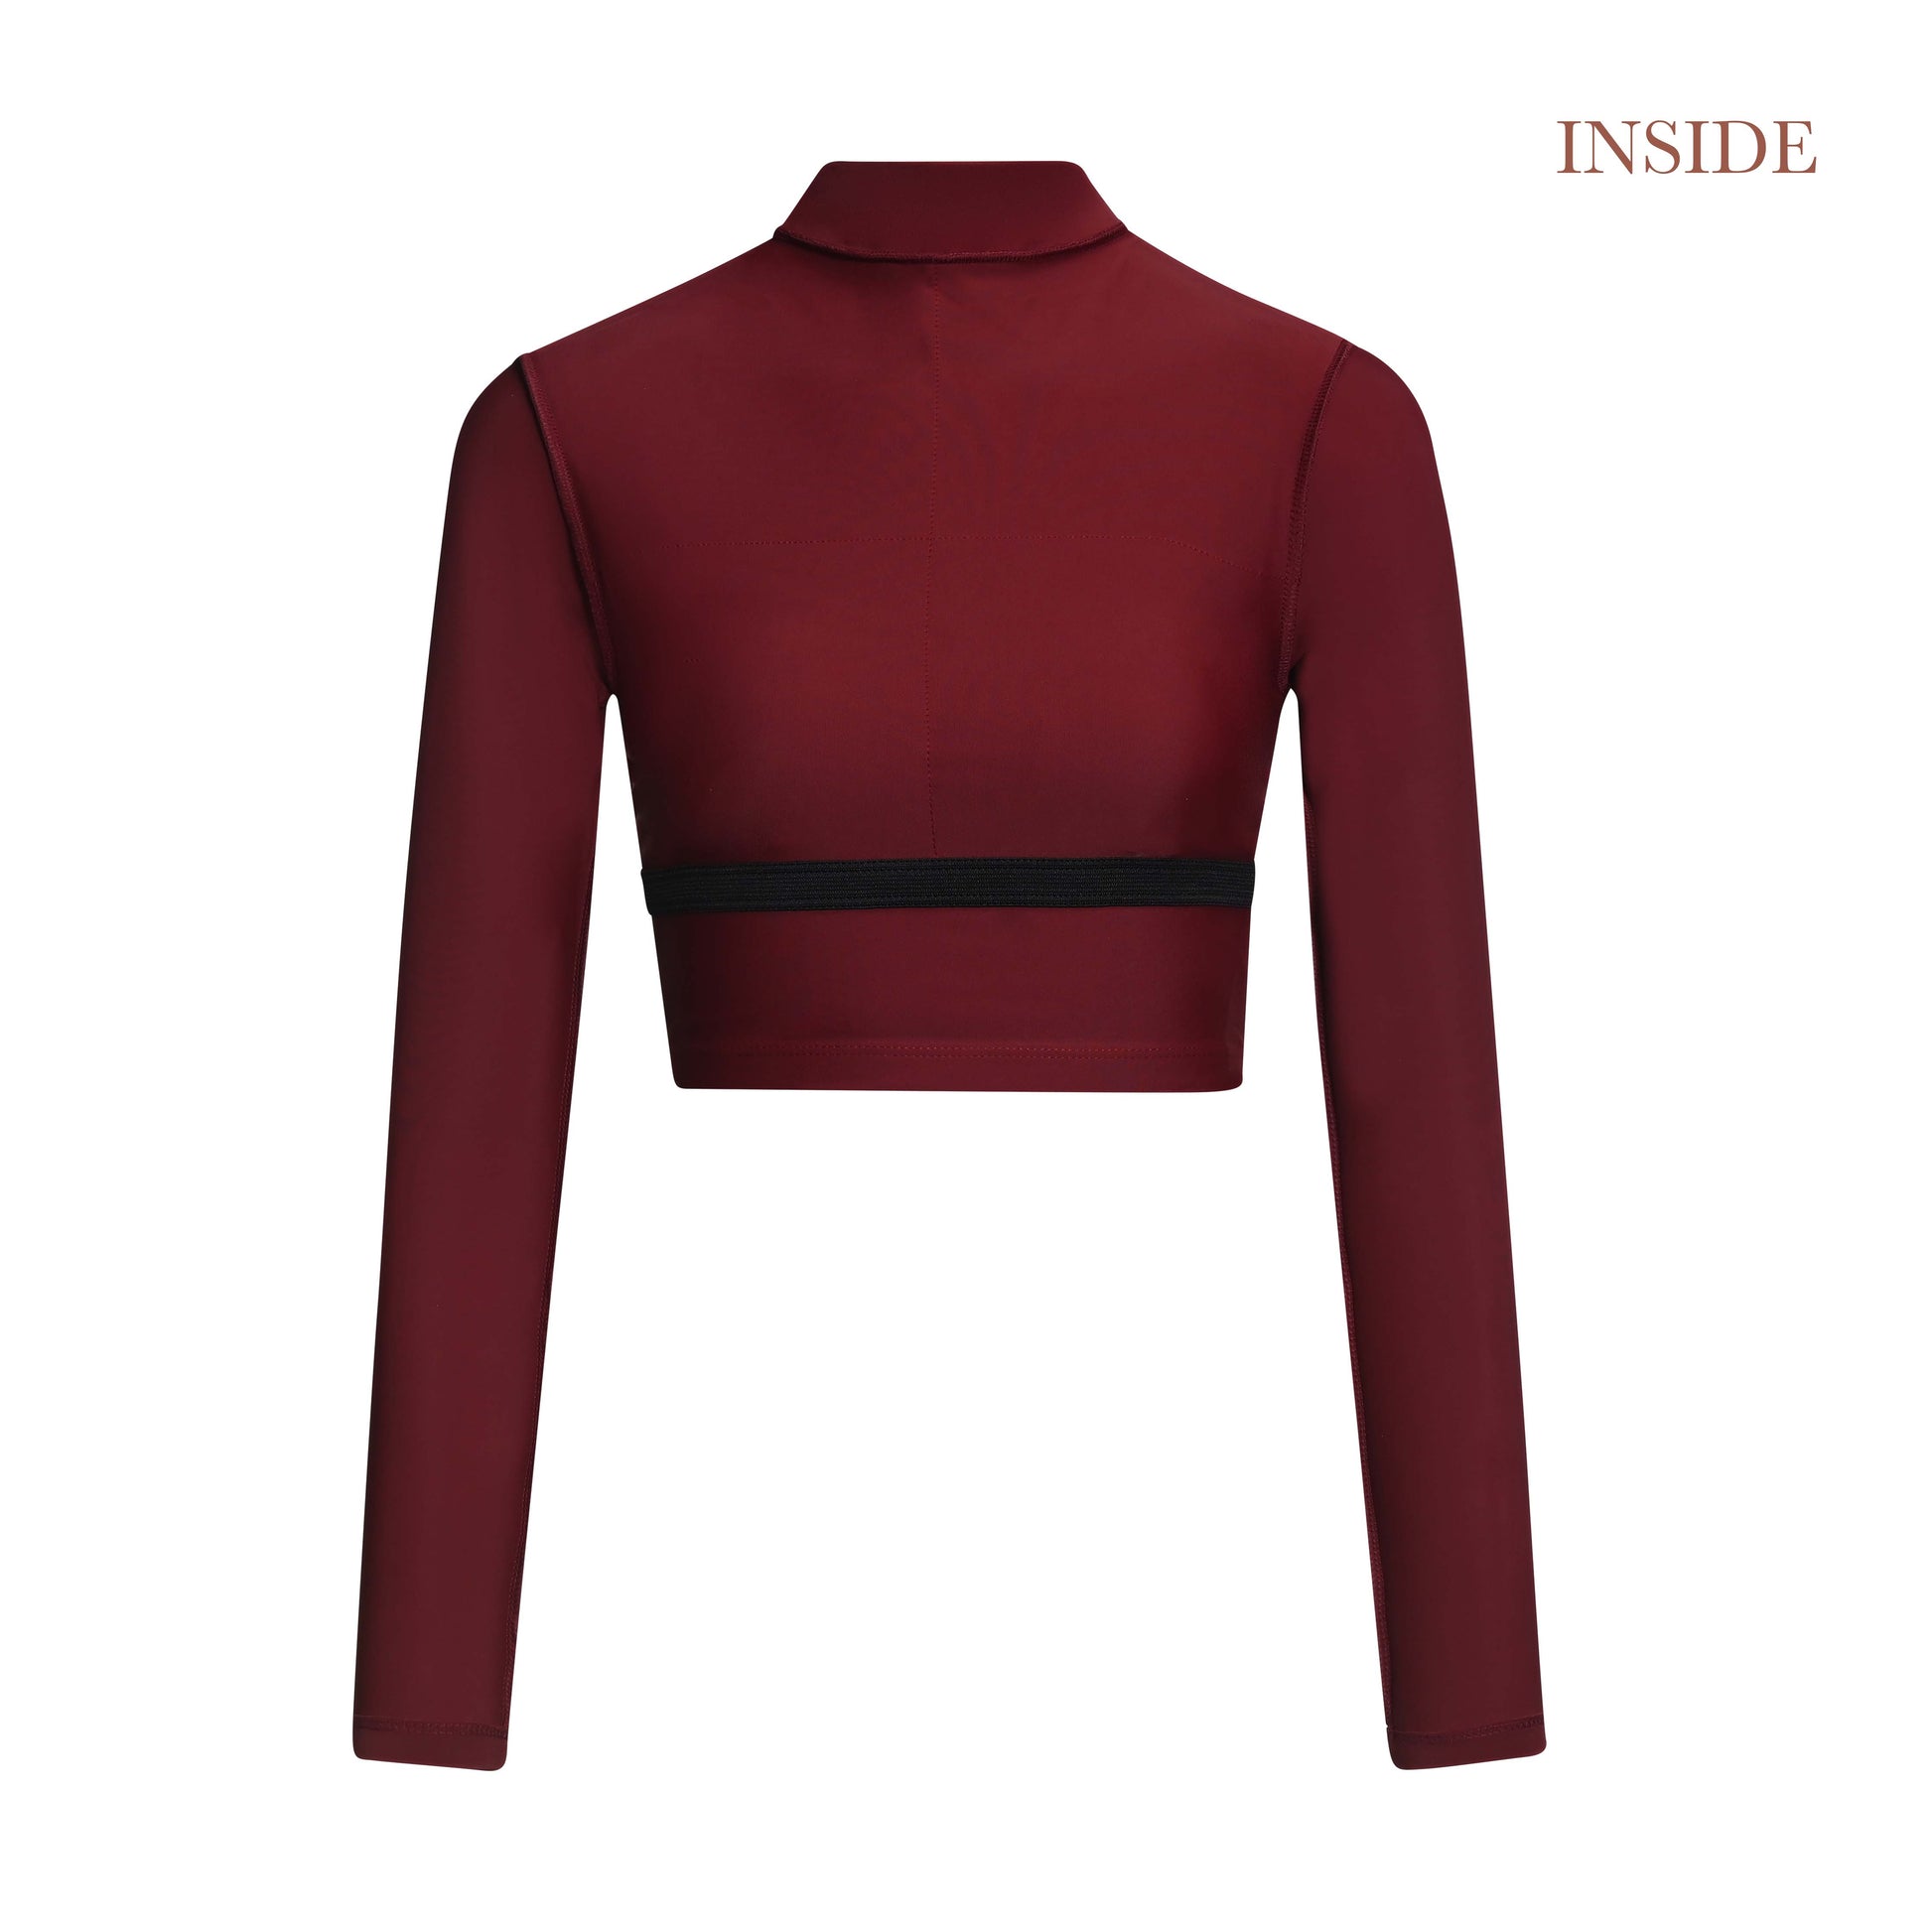 surf cropped top rashguard long sleeves swimsuit burgundy red ruby